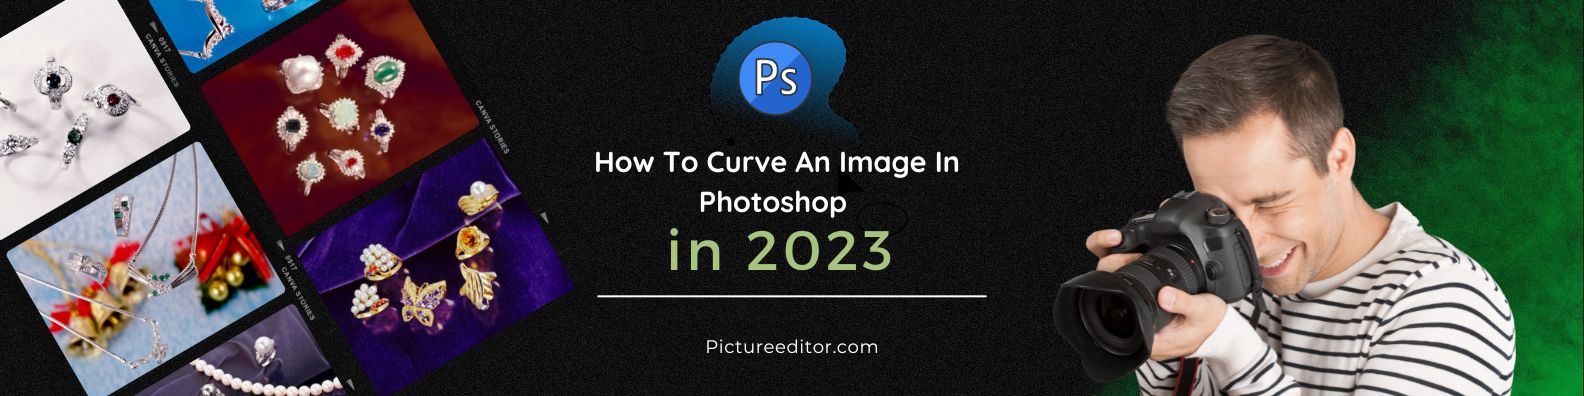 8 Best Tips For Jewelry Image Editing Services in 2023